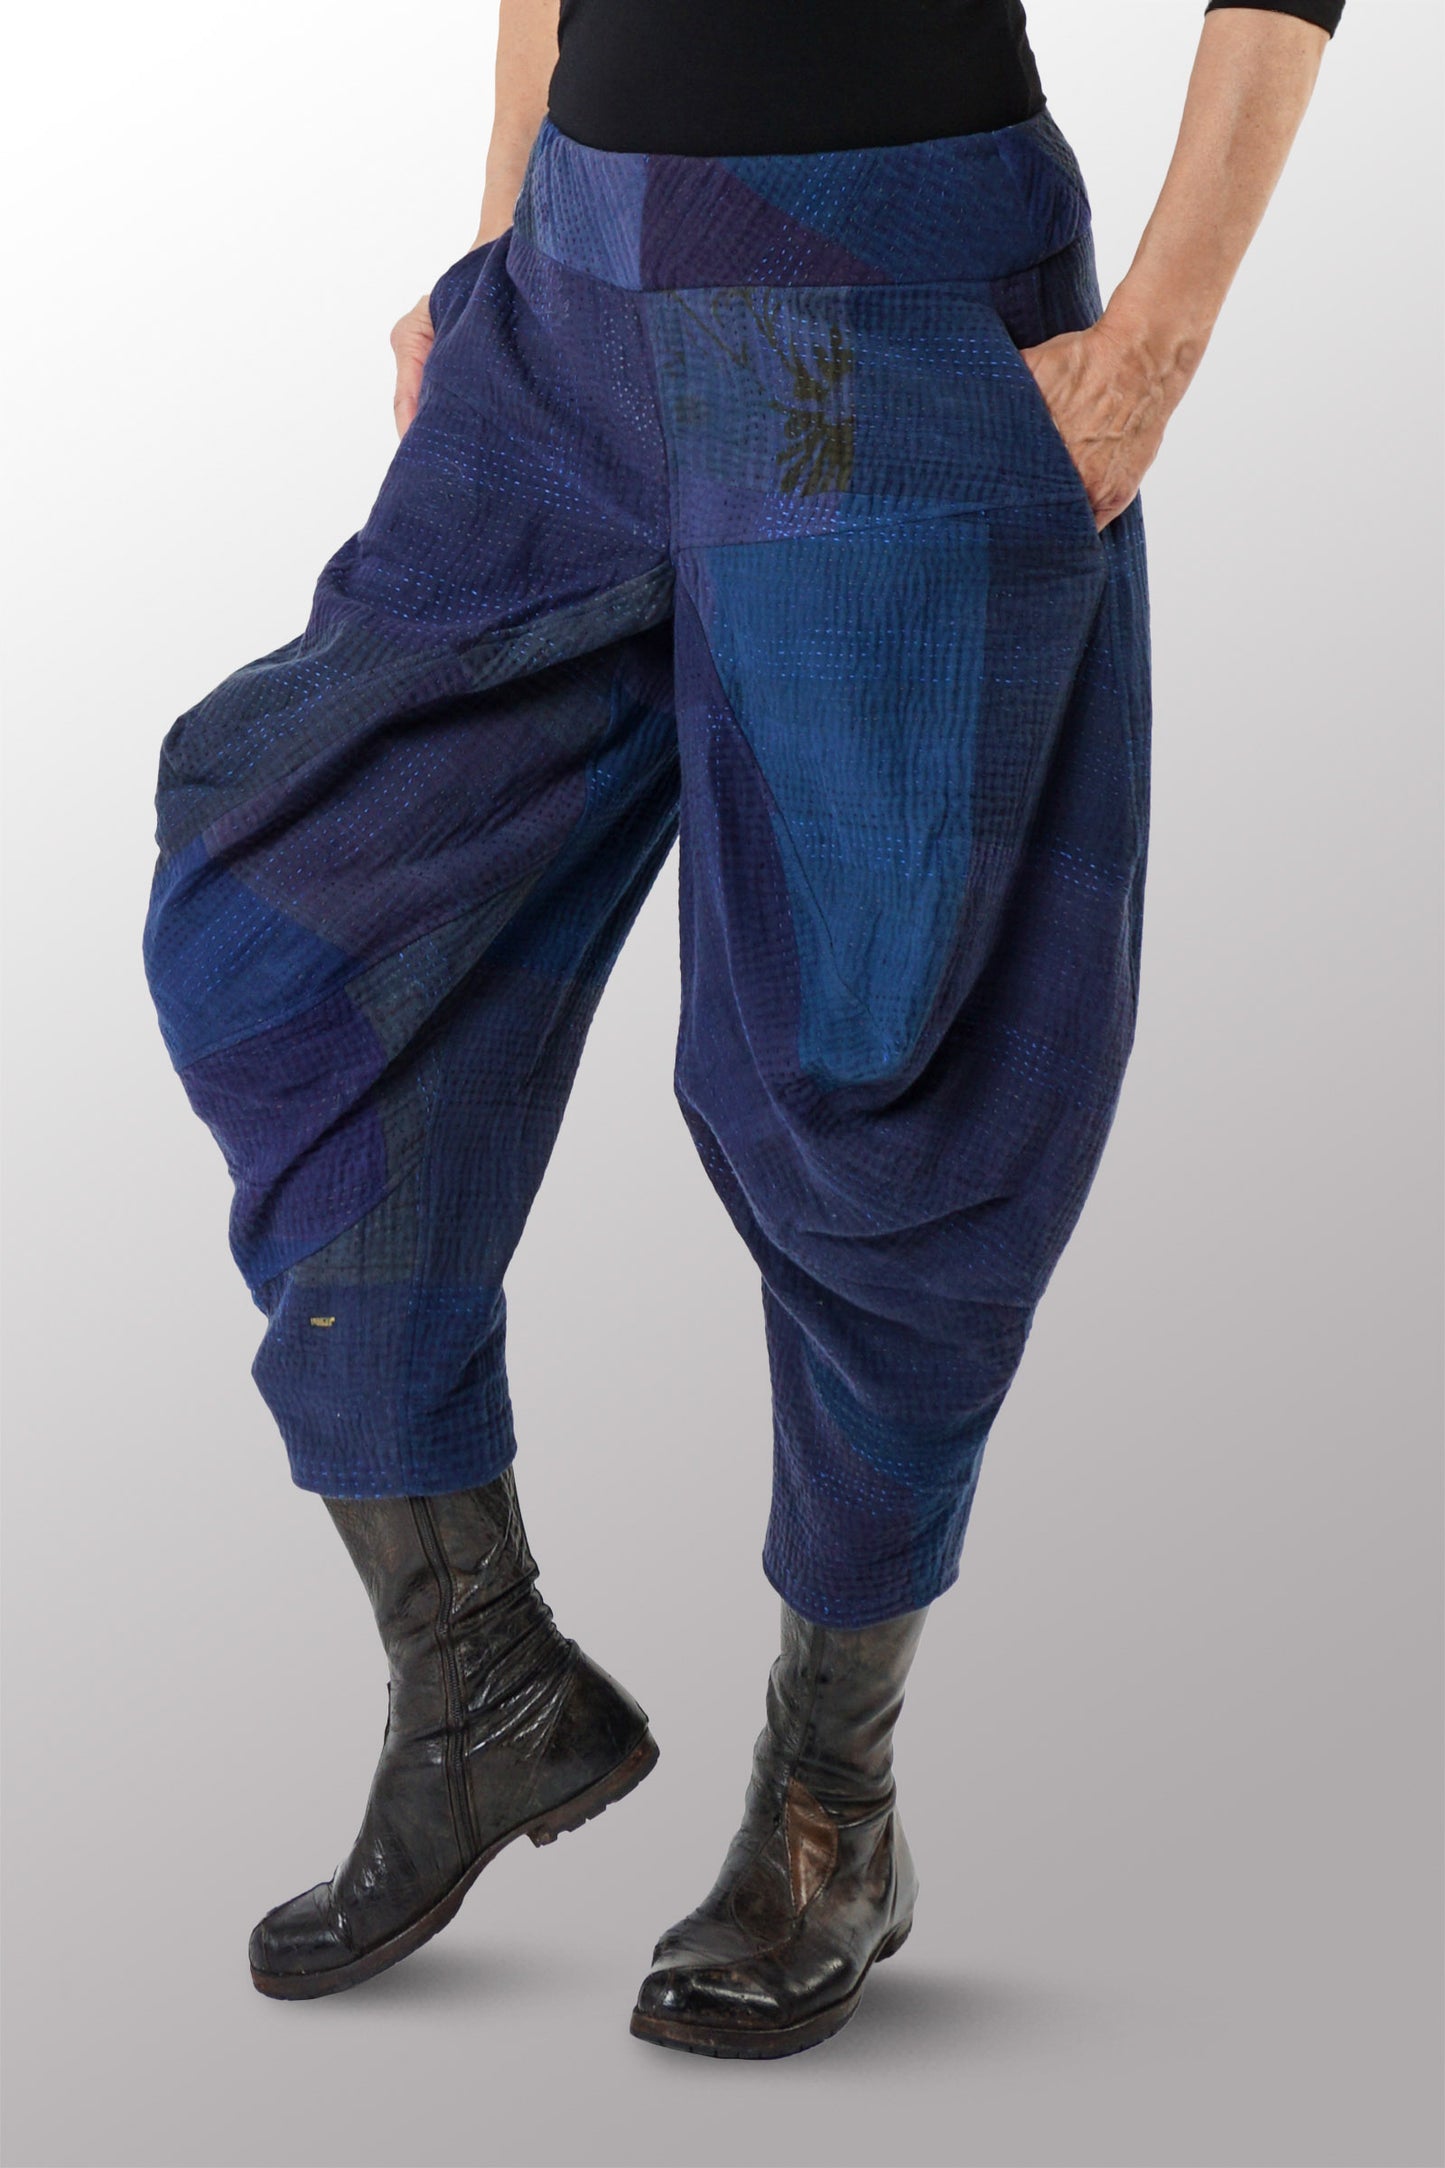 OMBRE PATCHED KANTHA NEW YAMAHA PANTS - op4652-nvy -